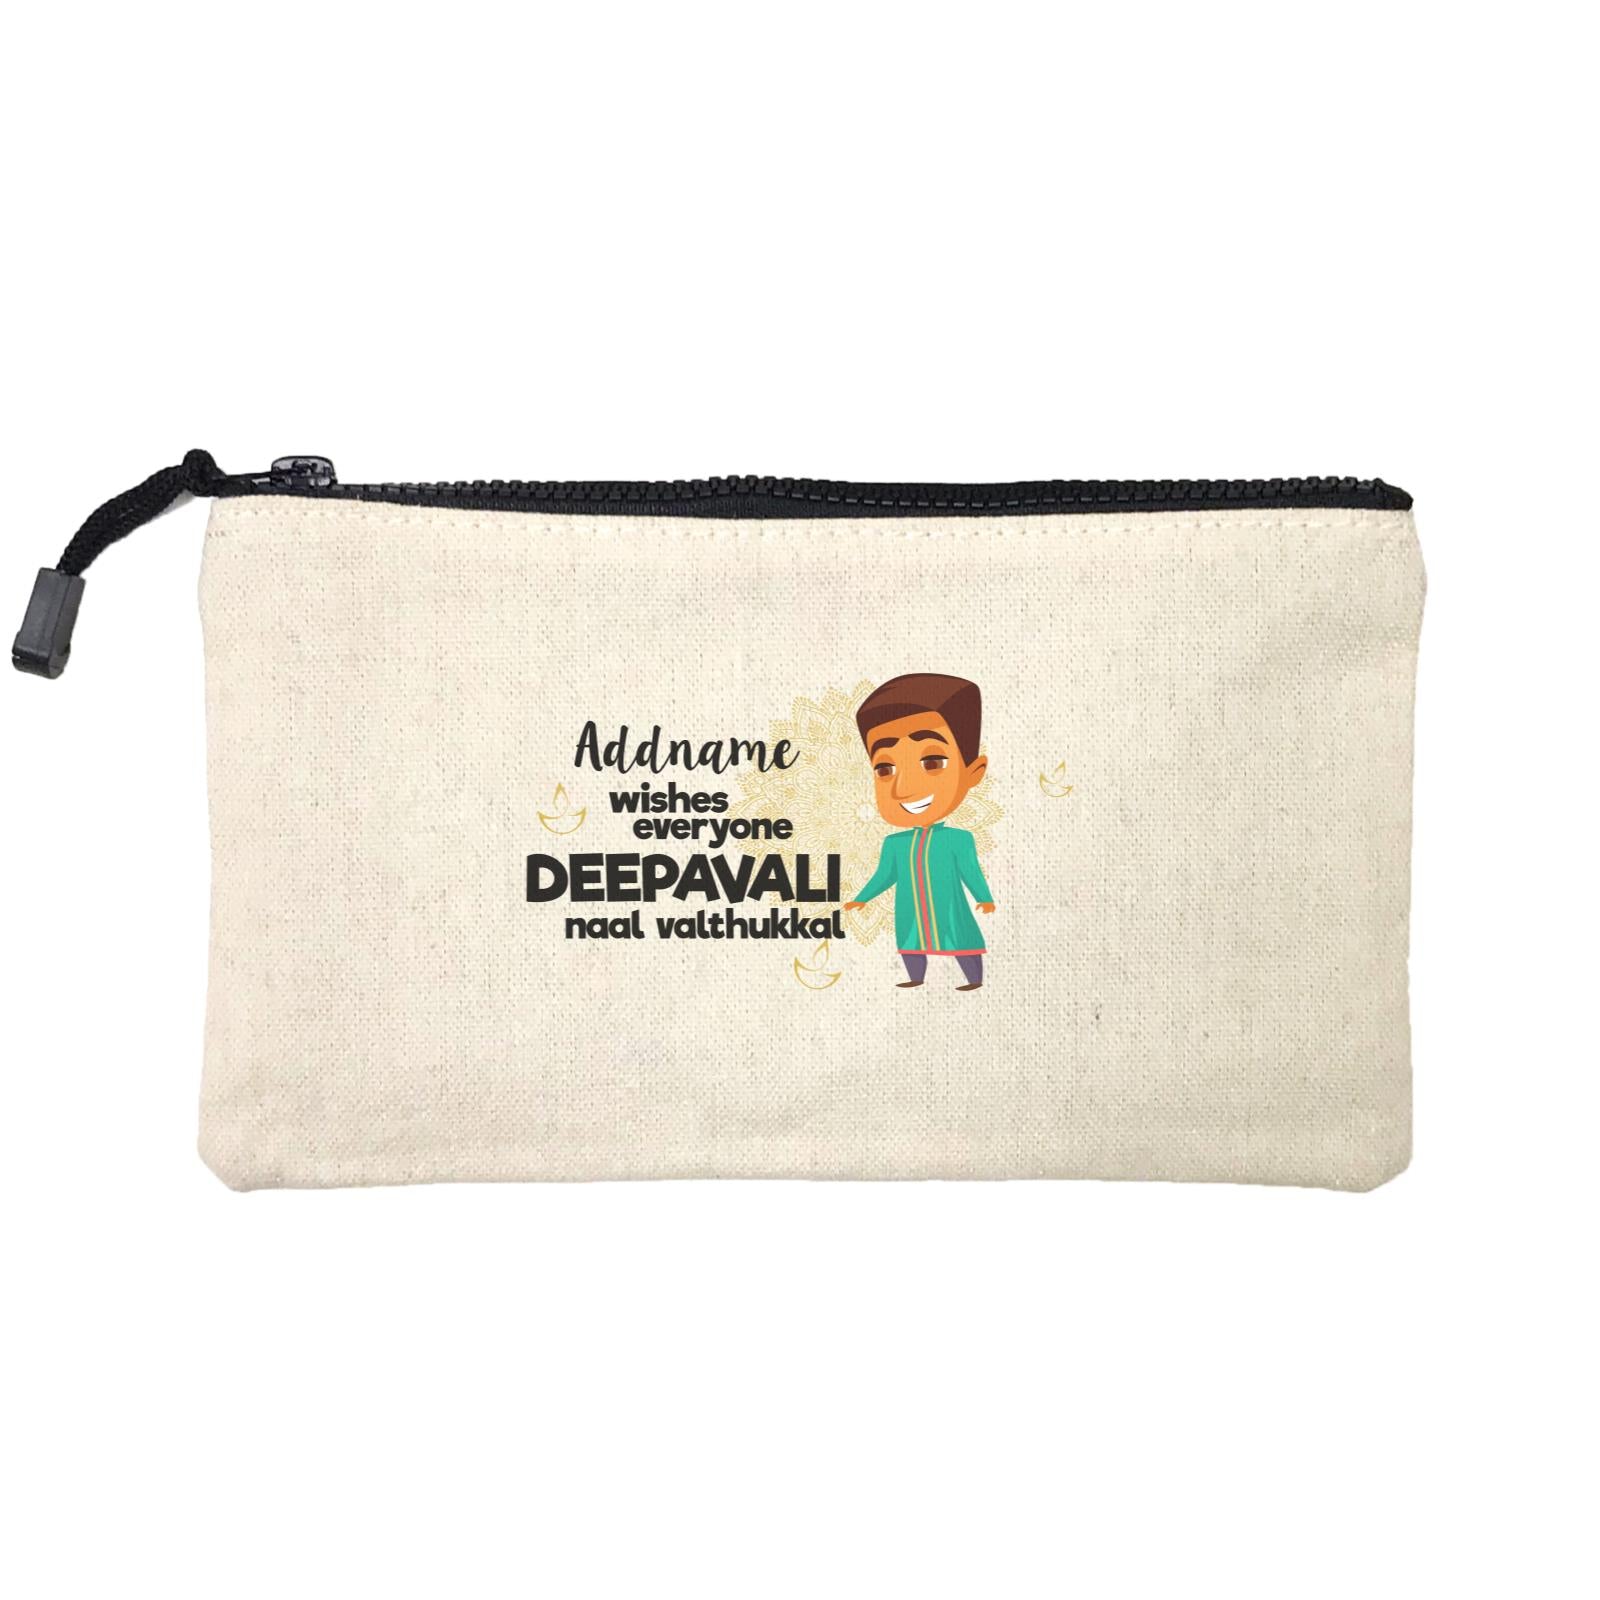 Cute Man Wishes Everyone Deepavali Addname Mini Accessories Stationery Pouch